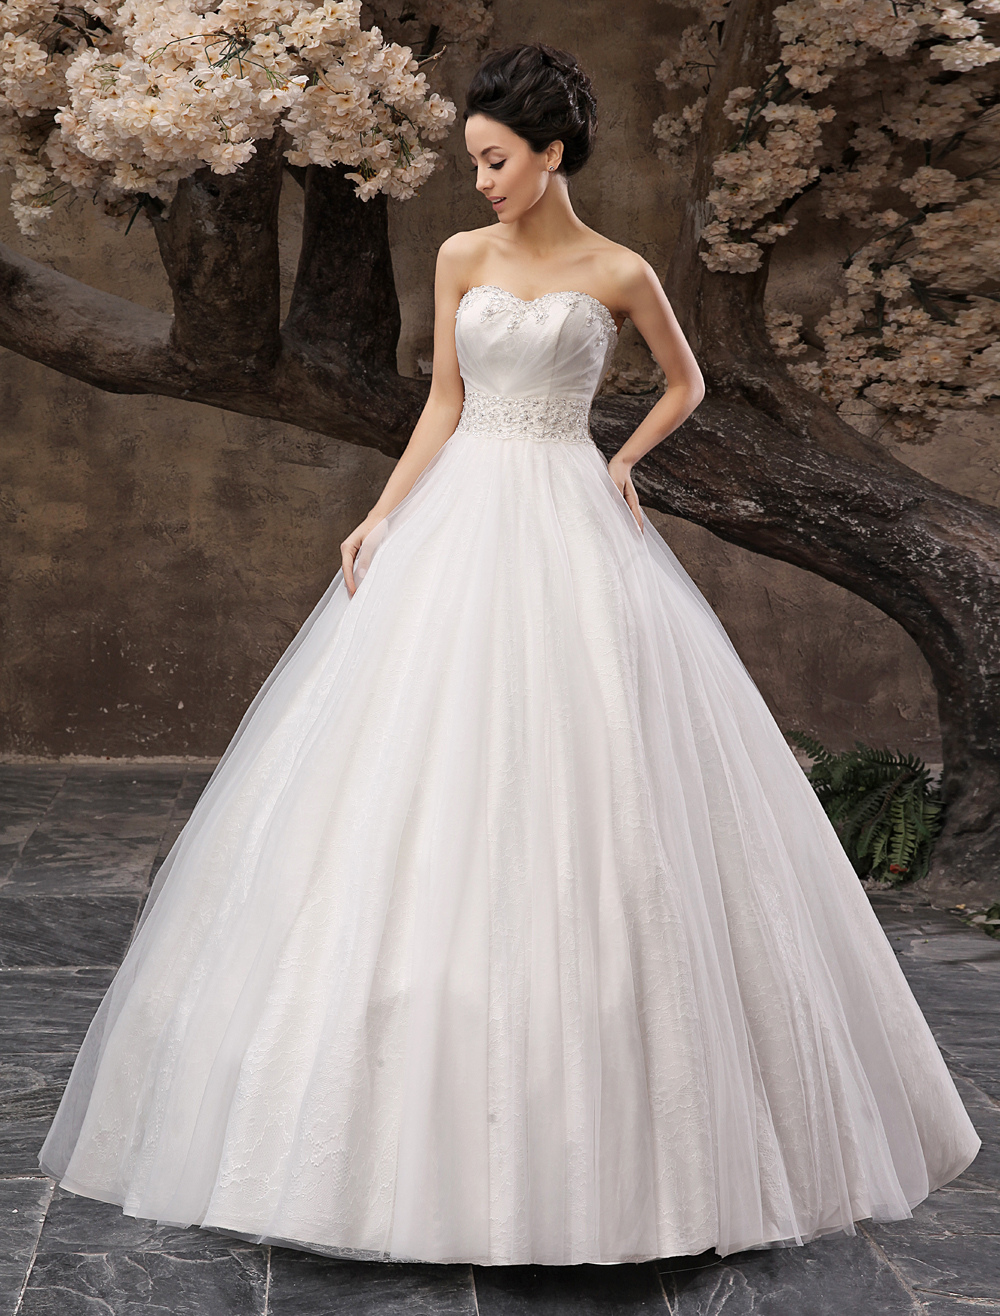 White Ball Gown Strapless Sweetheart Neck Applique Floor-Length Brides ...